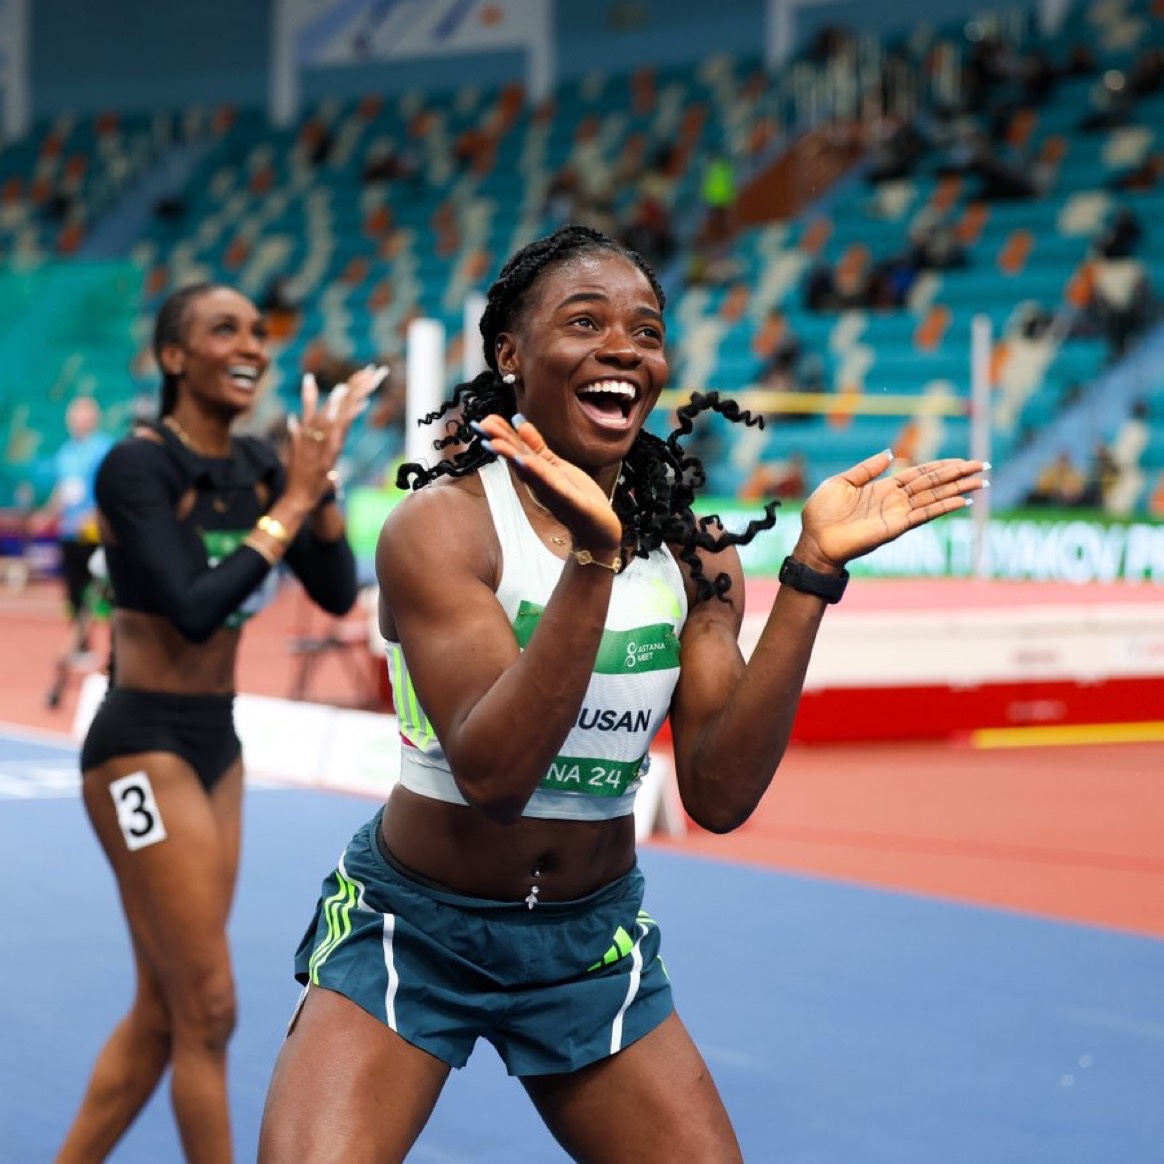 Wow 🤩 Tobi Amusan is the FASTEST woman in the world. 👏👏 she stormed to win the women's 100mH at the Jamaica Athletics Invitational, clocking a time of 12.40s (0.9) ahead of the World Champion Danielle Williams who settled for 2nd in 12.46s. 🔥🇳🇬